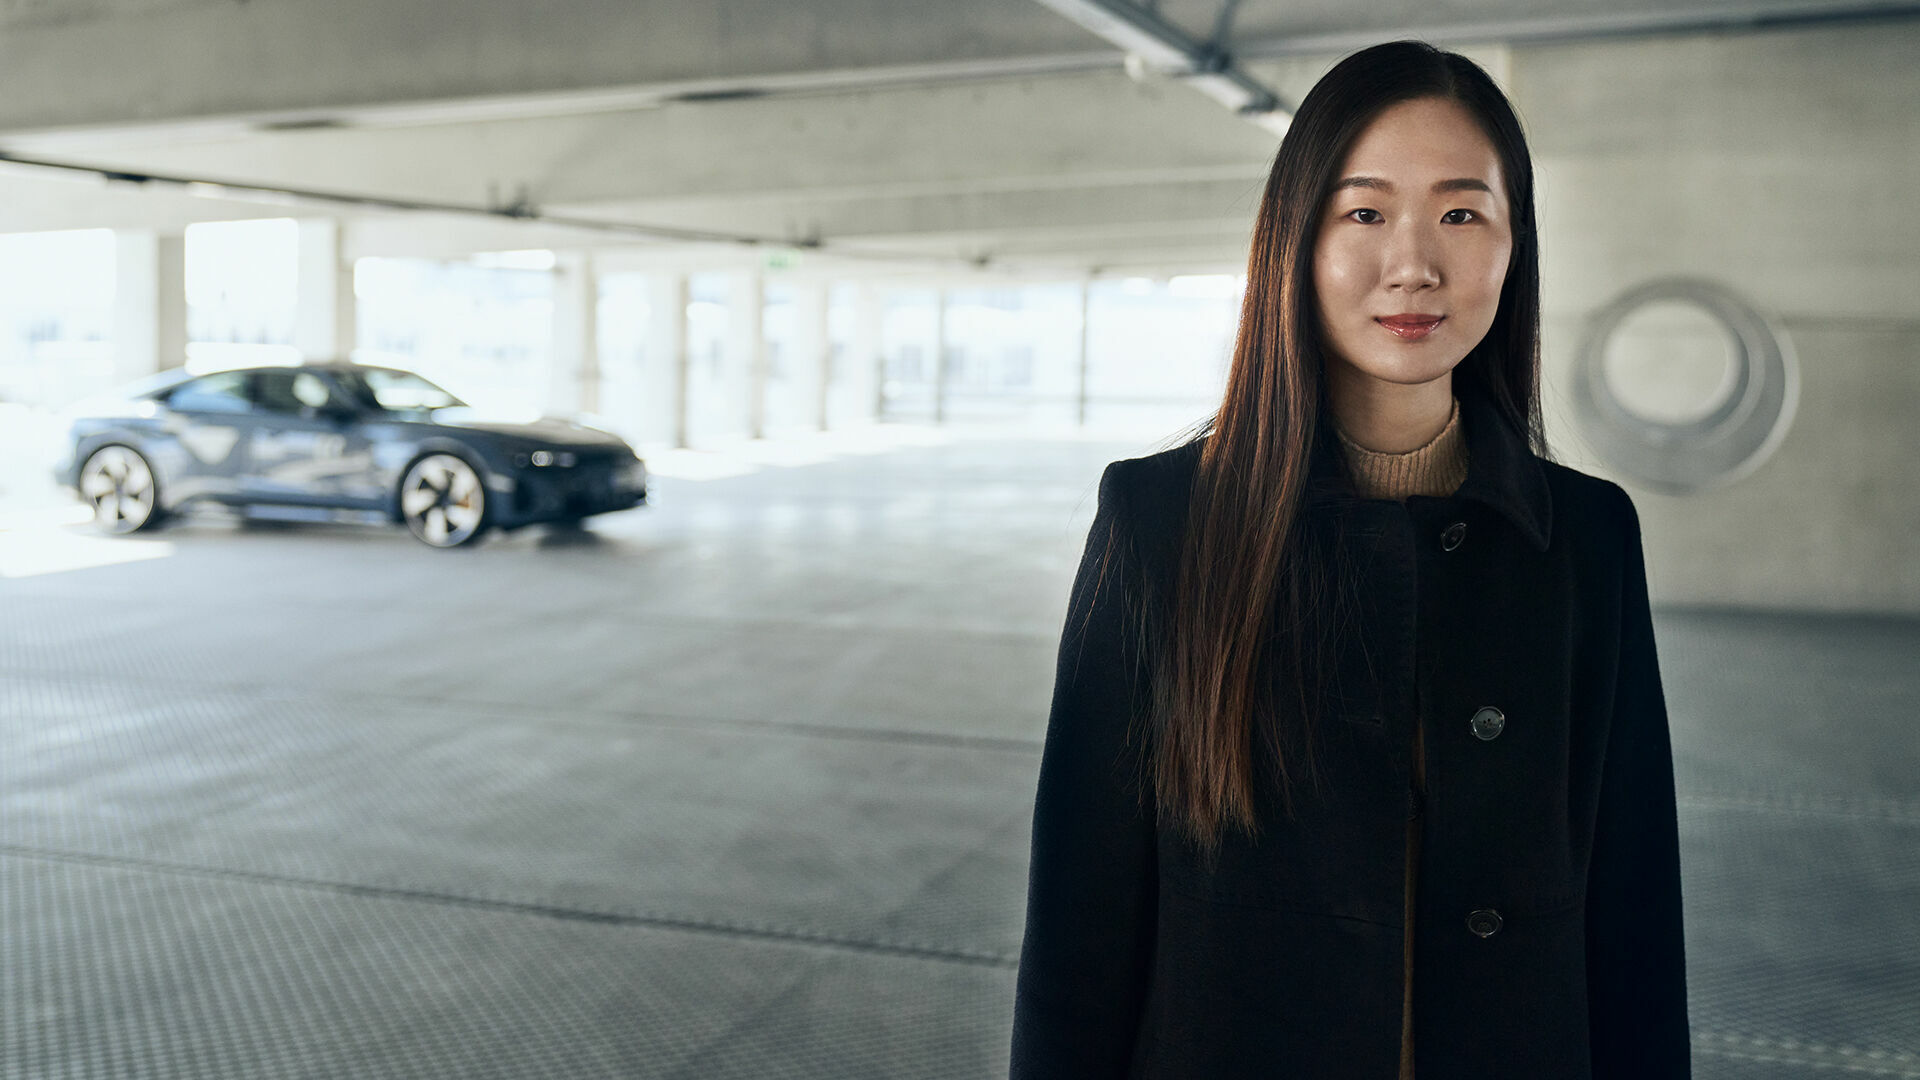 New Audi employer brand identity “We are Progress”: Examples of lived transformation – Audi employees talk about how they are committed to progress